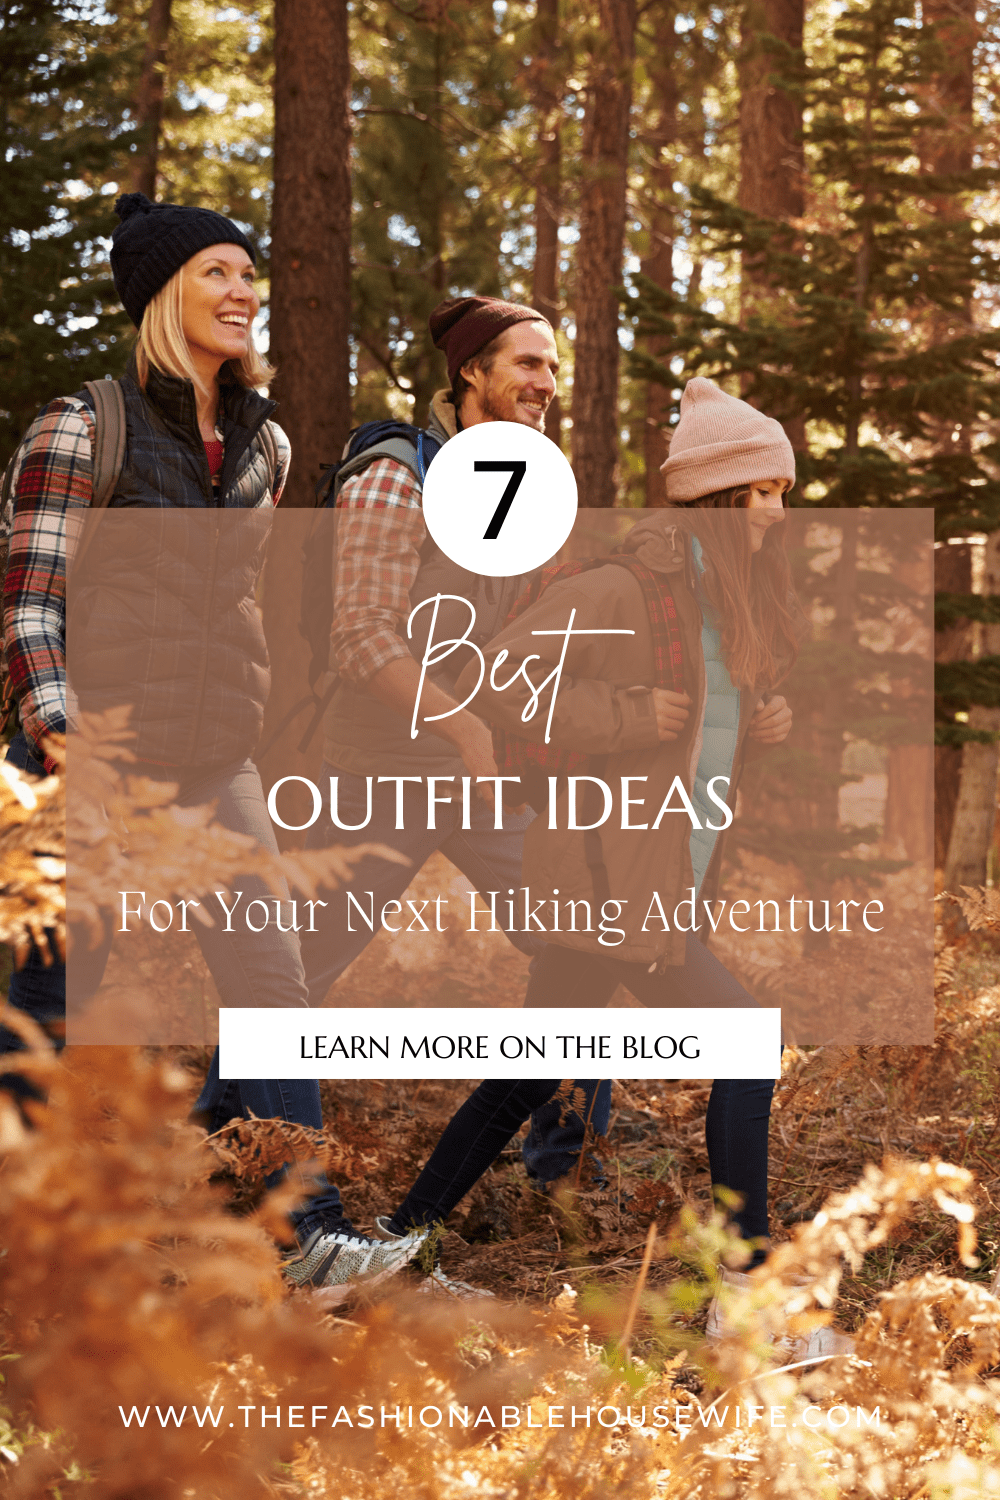 7 Best Outfit Ideas for Your Next Hiking Adventure • The